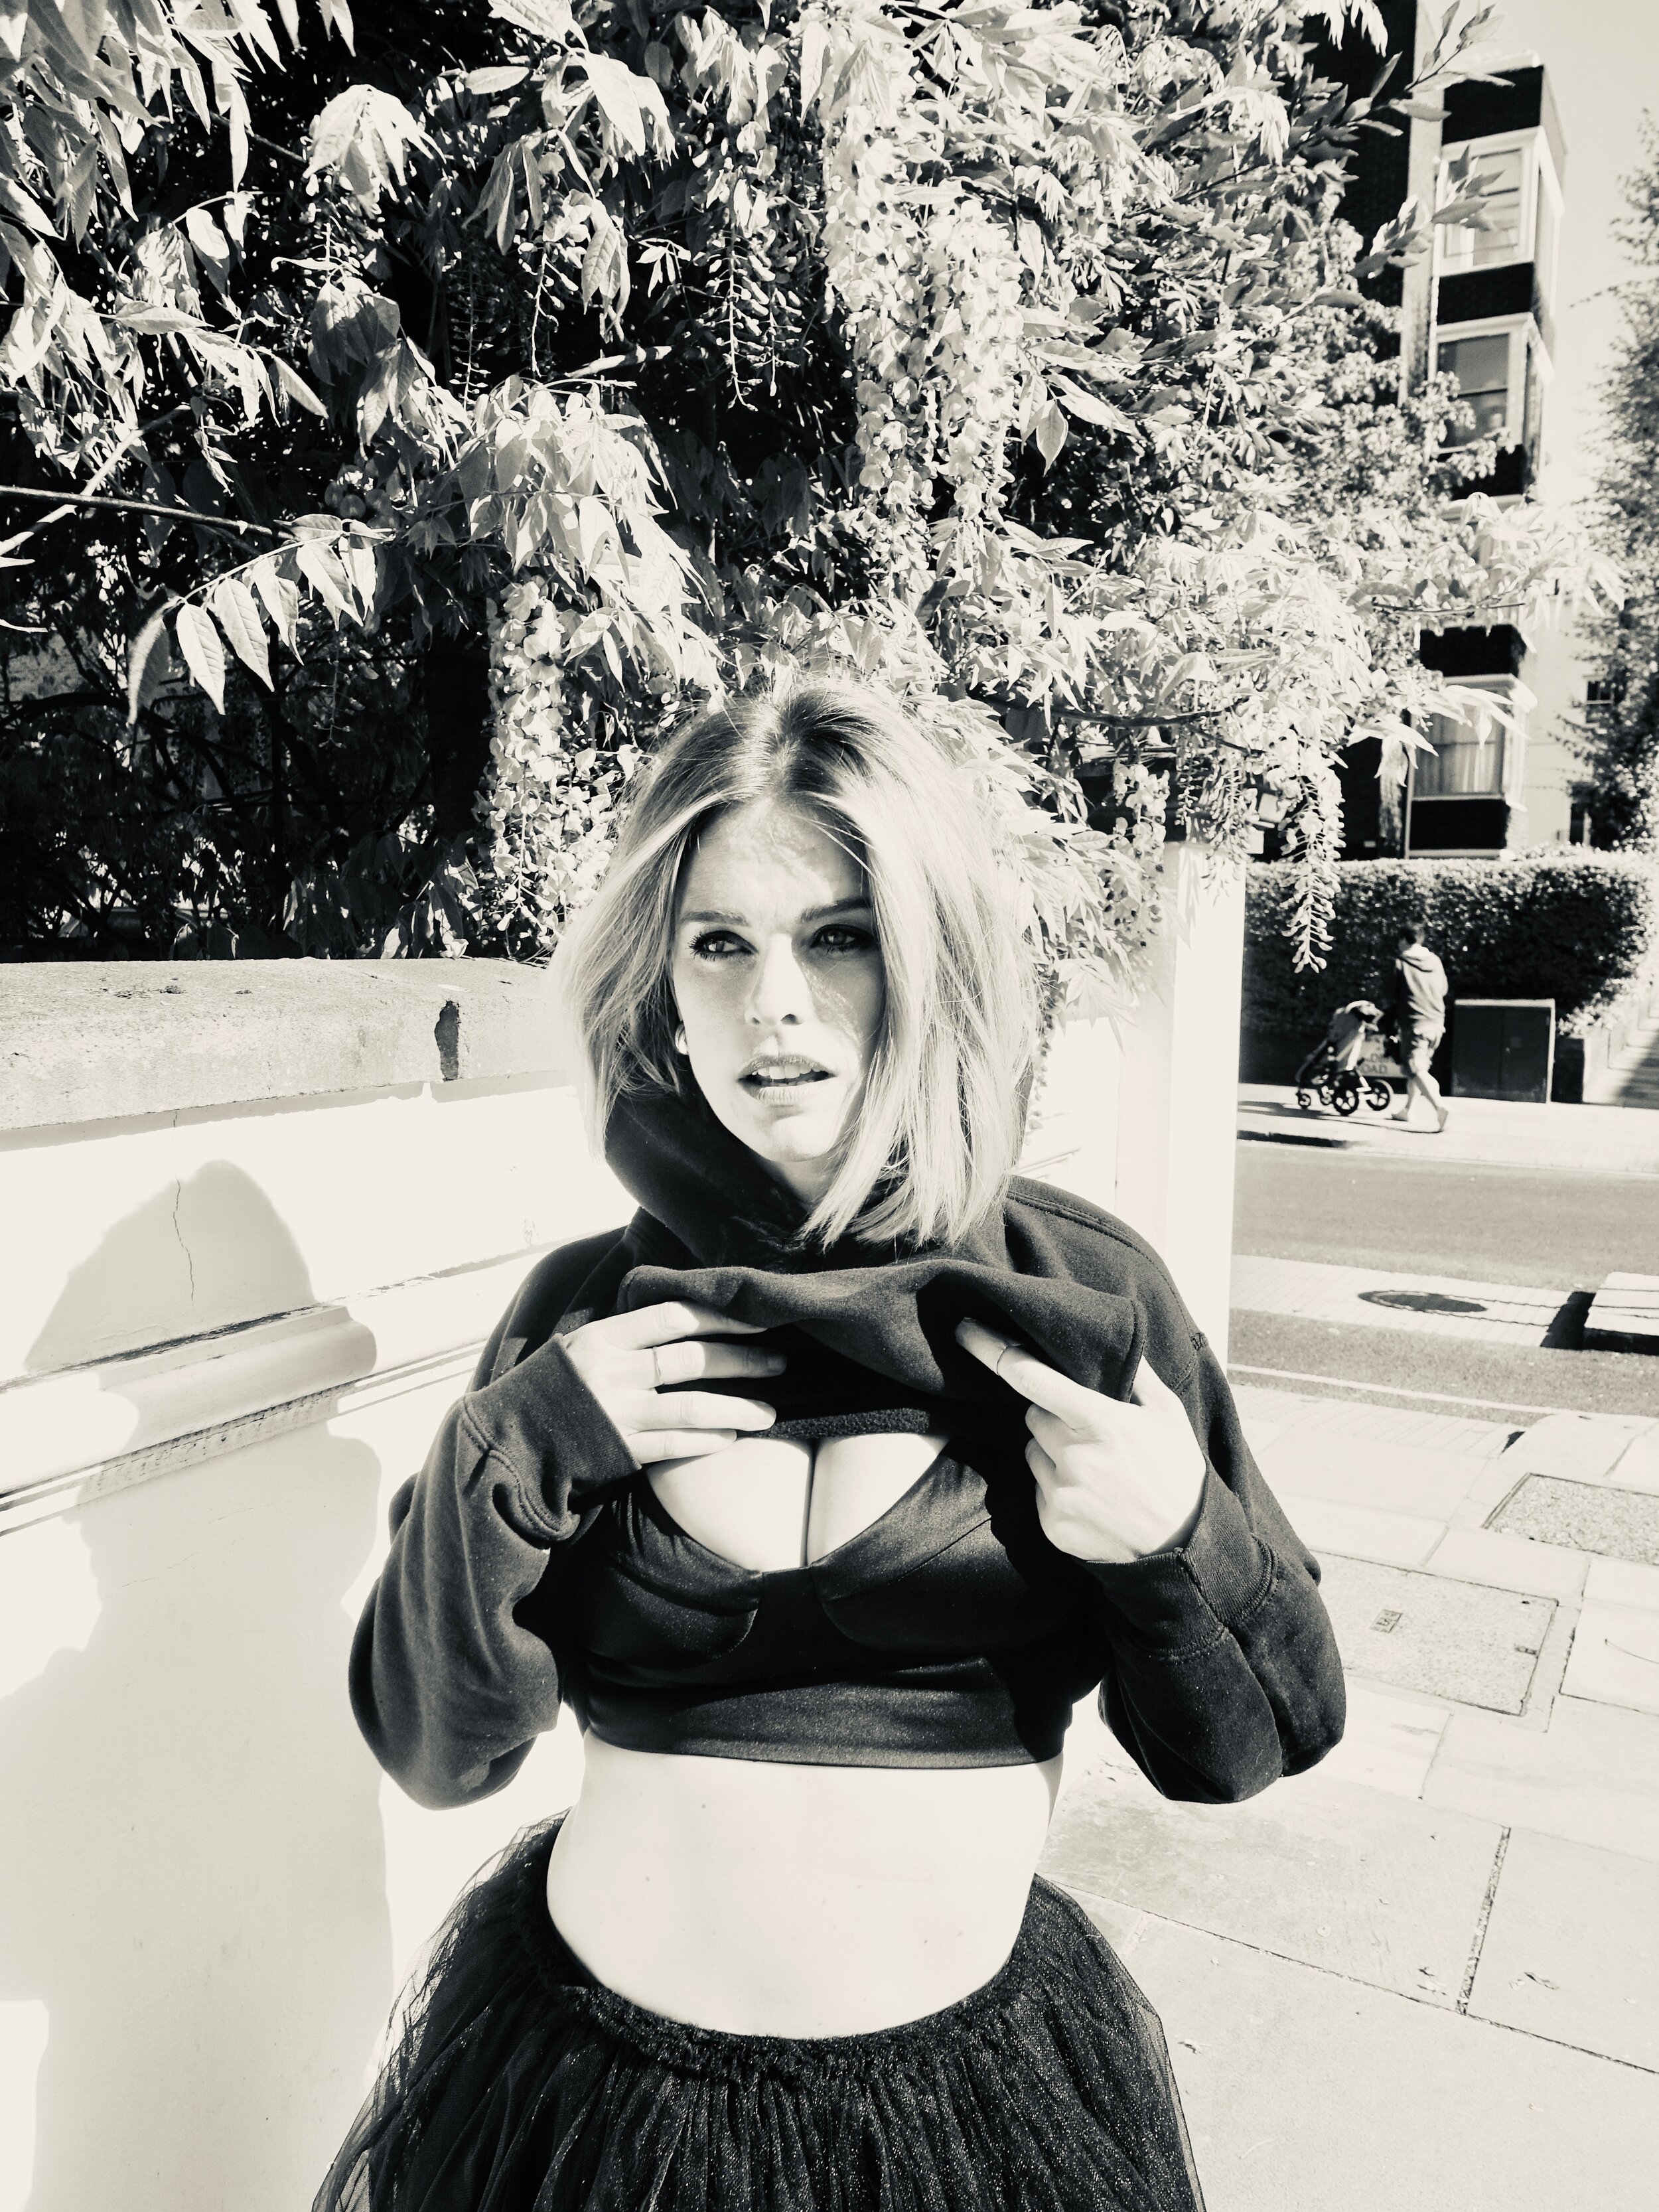 Photos n°1 : Alice Eve is Flaunting!